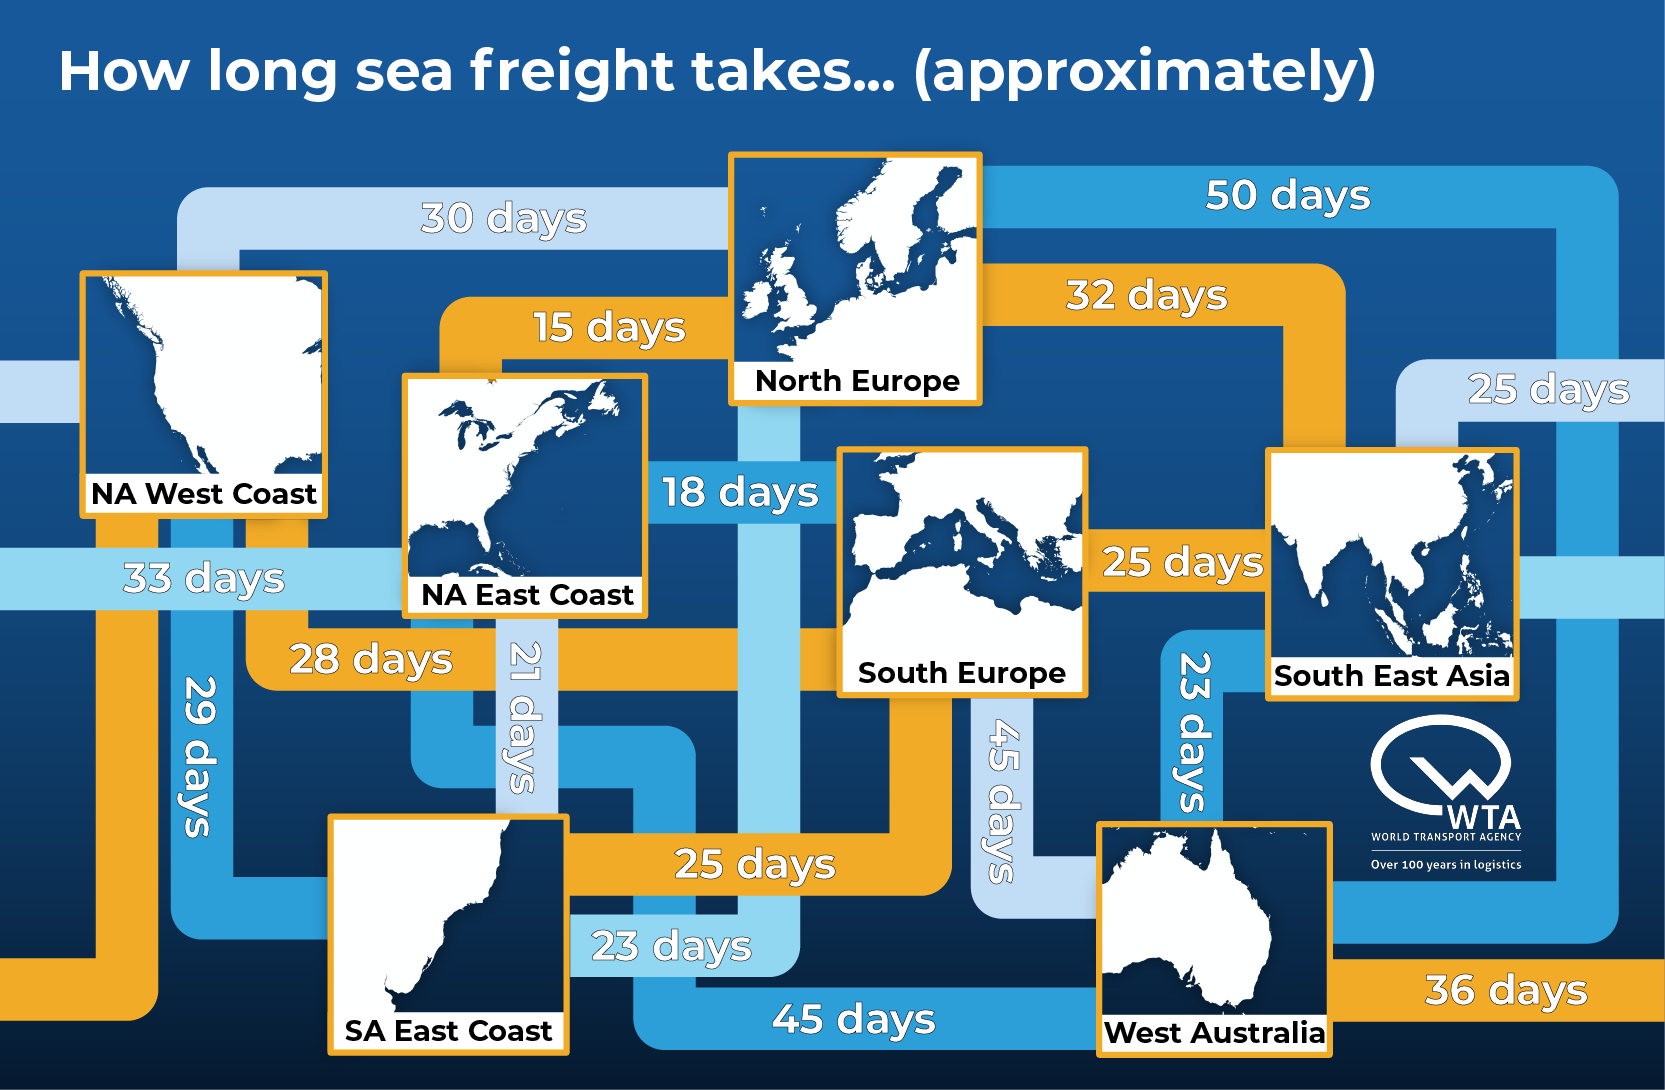 How long sea freight takes between regions infographic